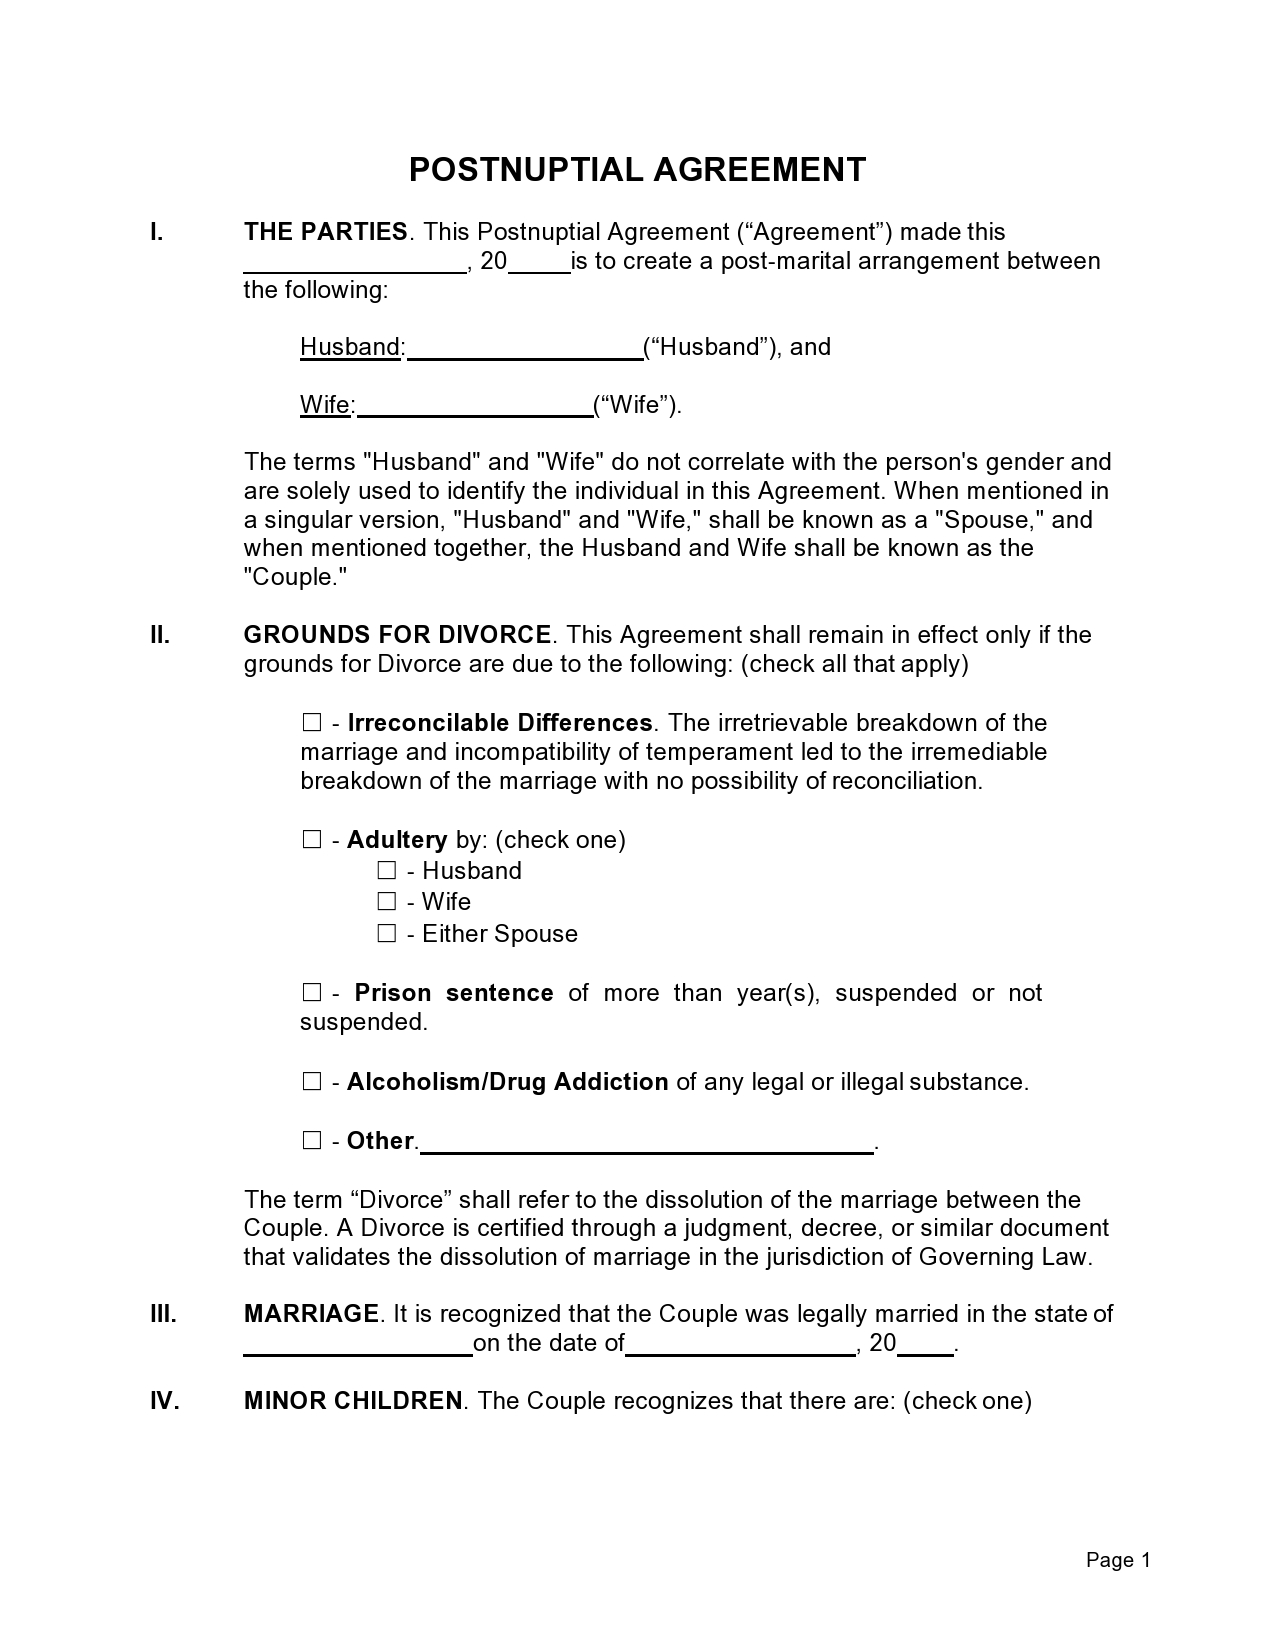 Free postnuptial agreement template 23